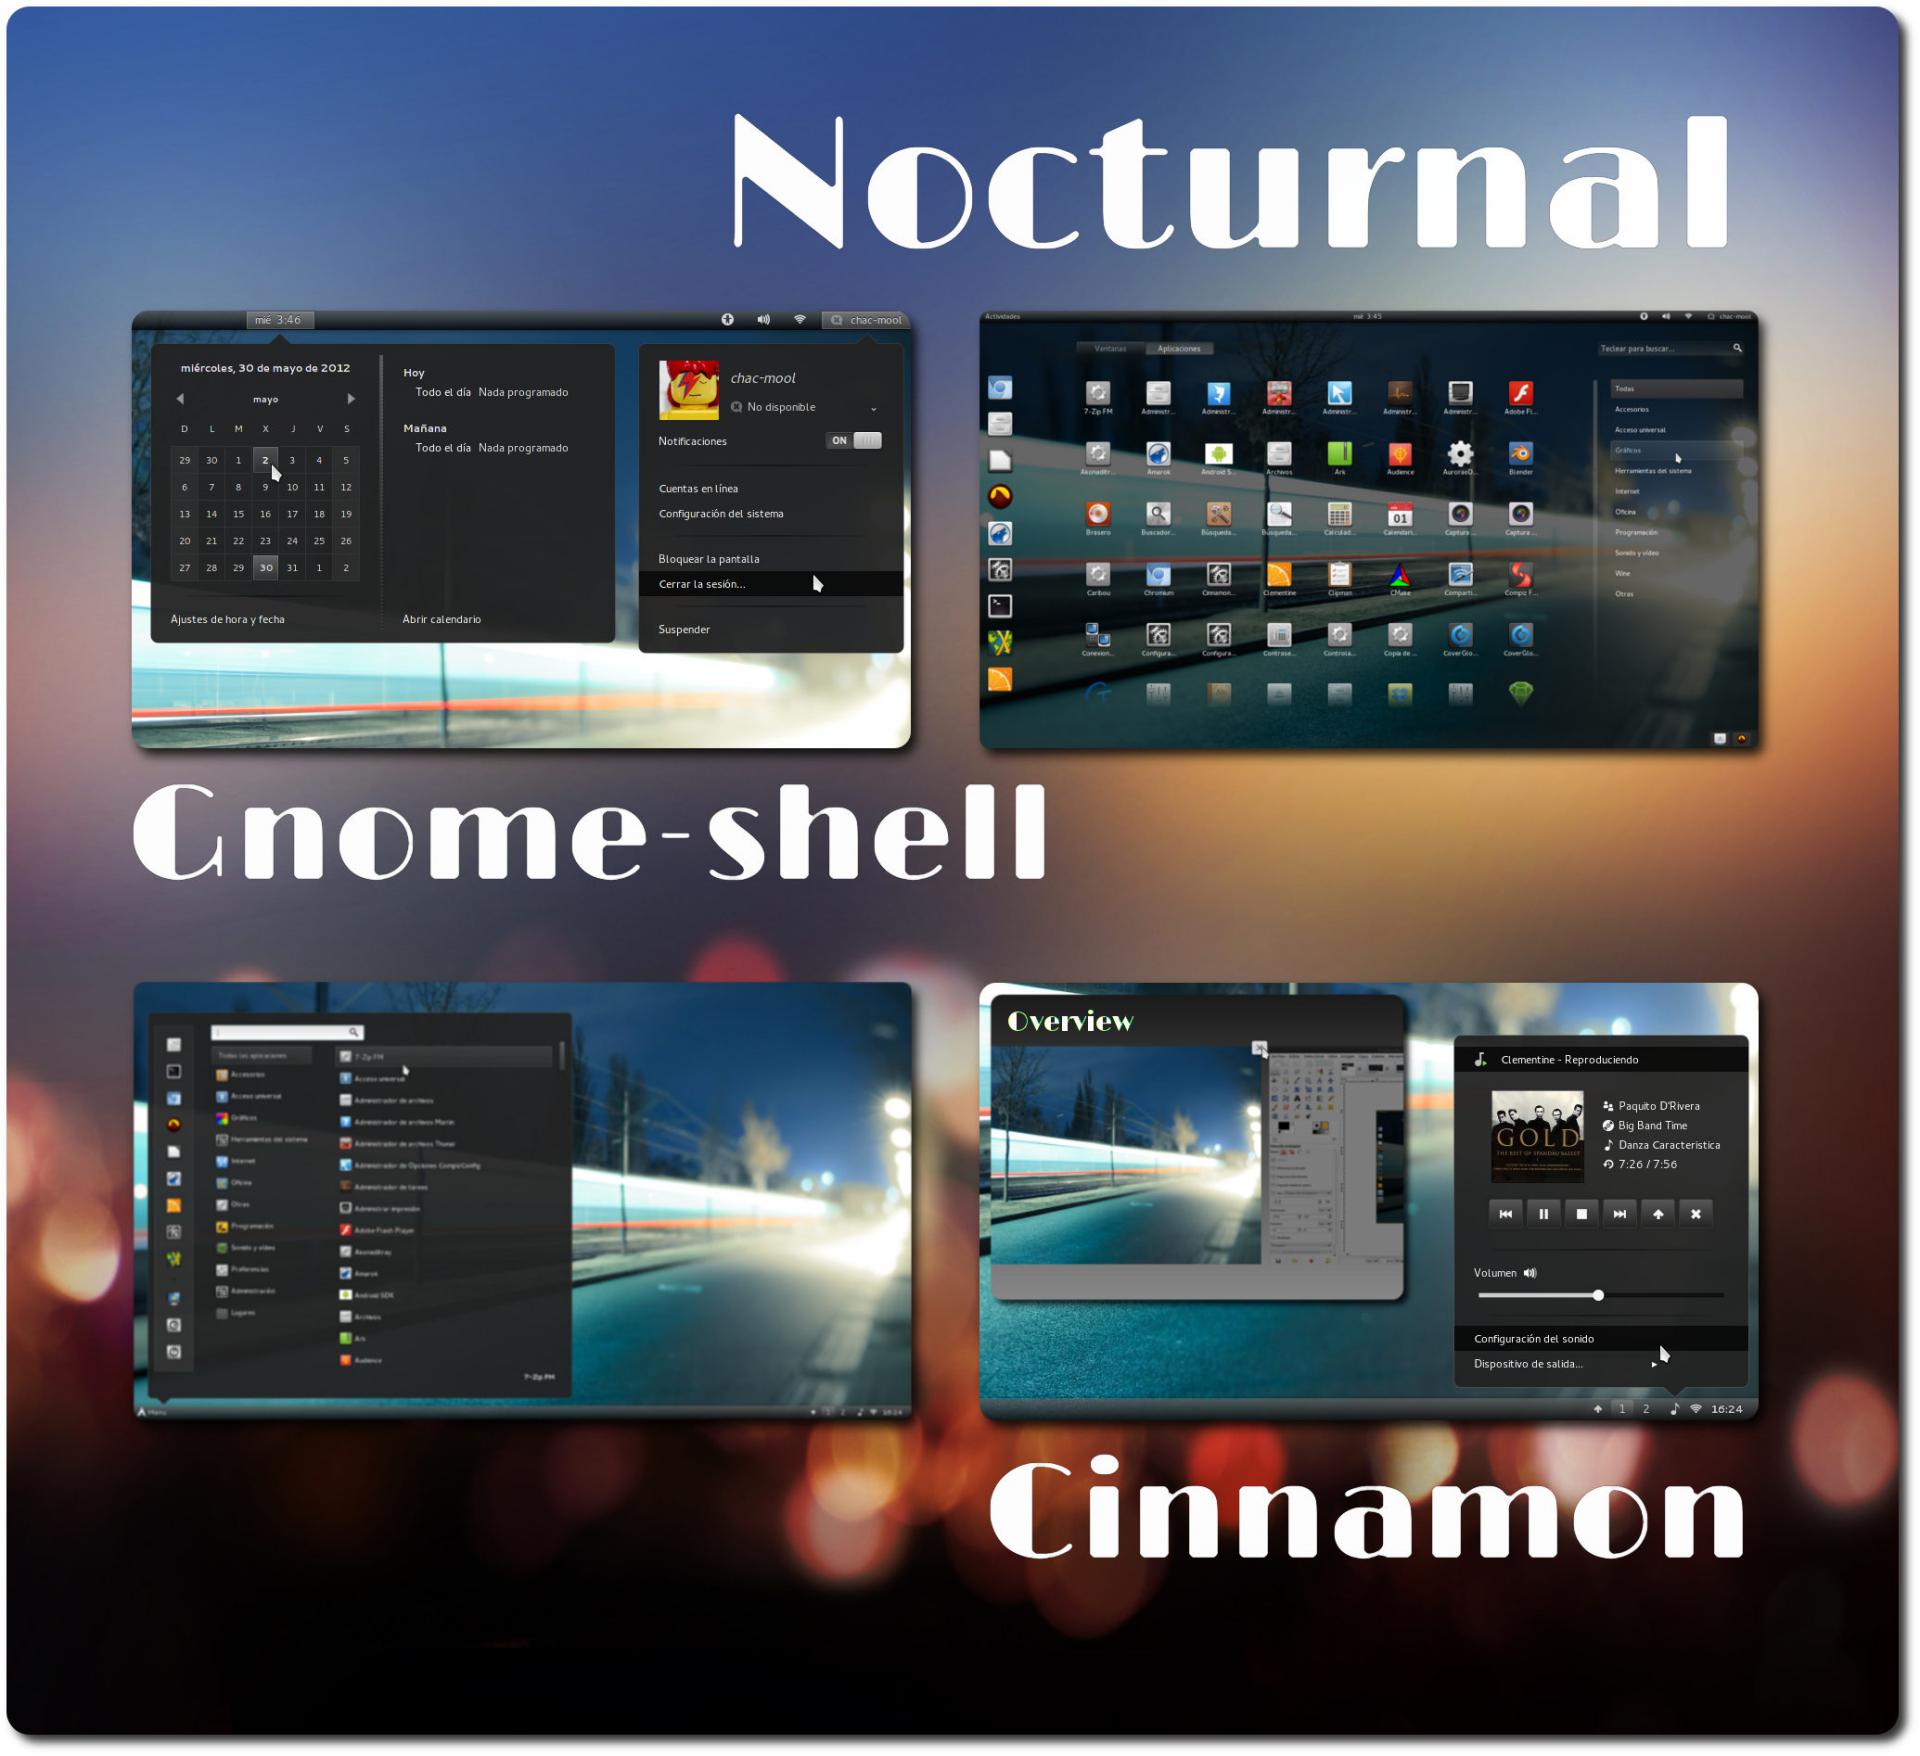 Nocturnal for GNOME-Shell